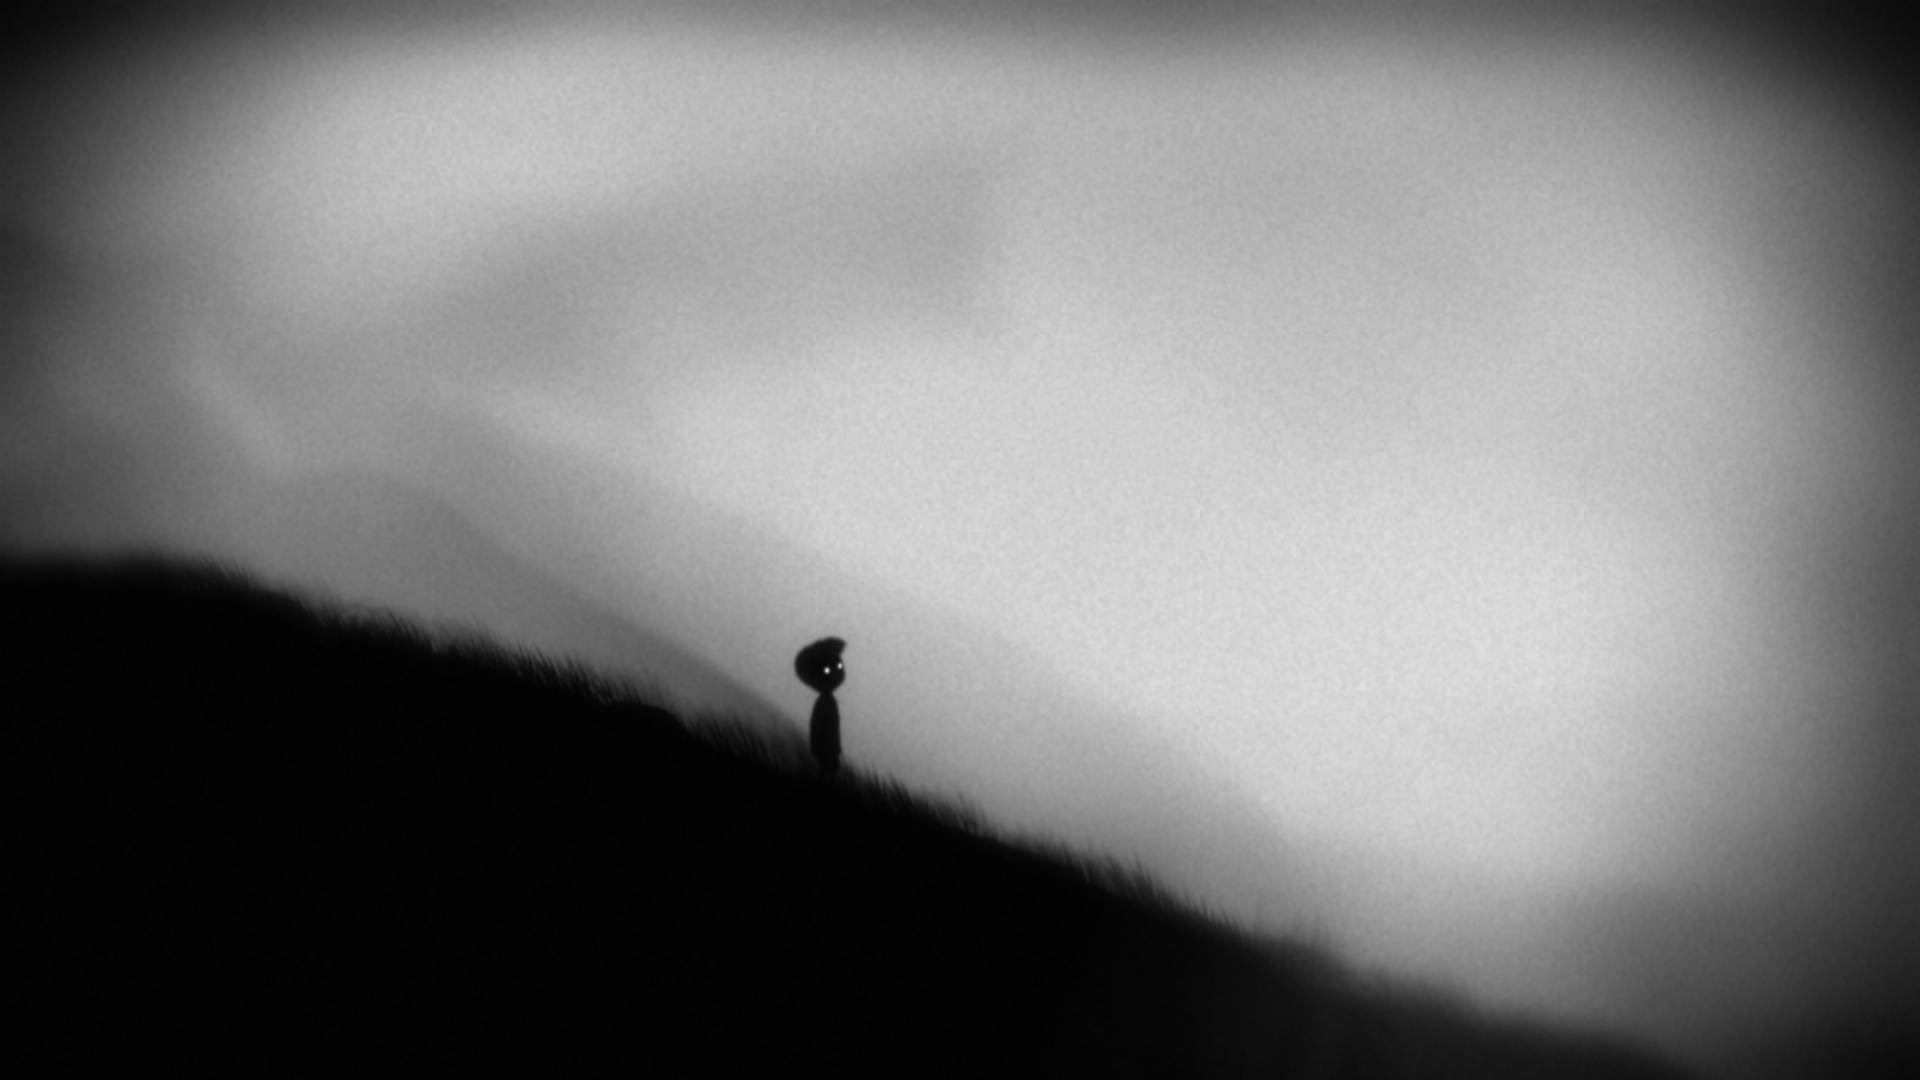 Limbo Pics, Video Game Collection